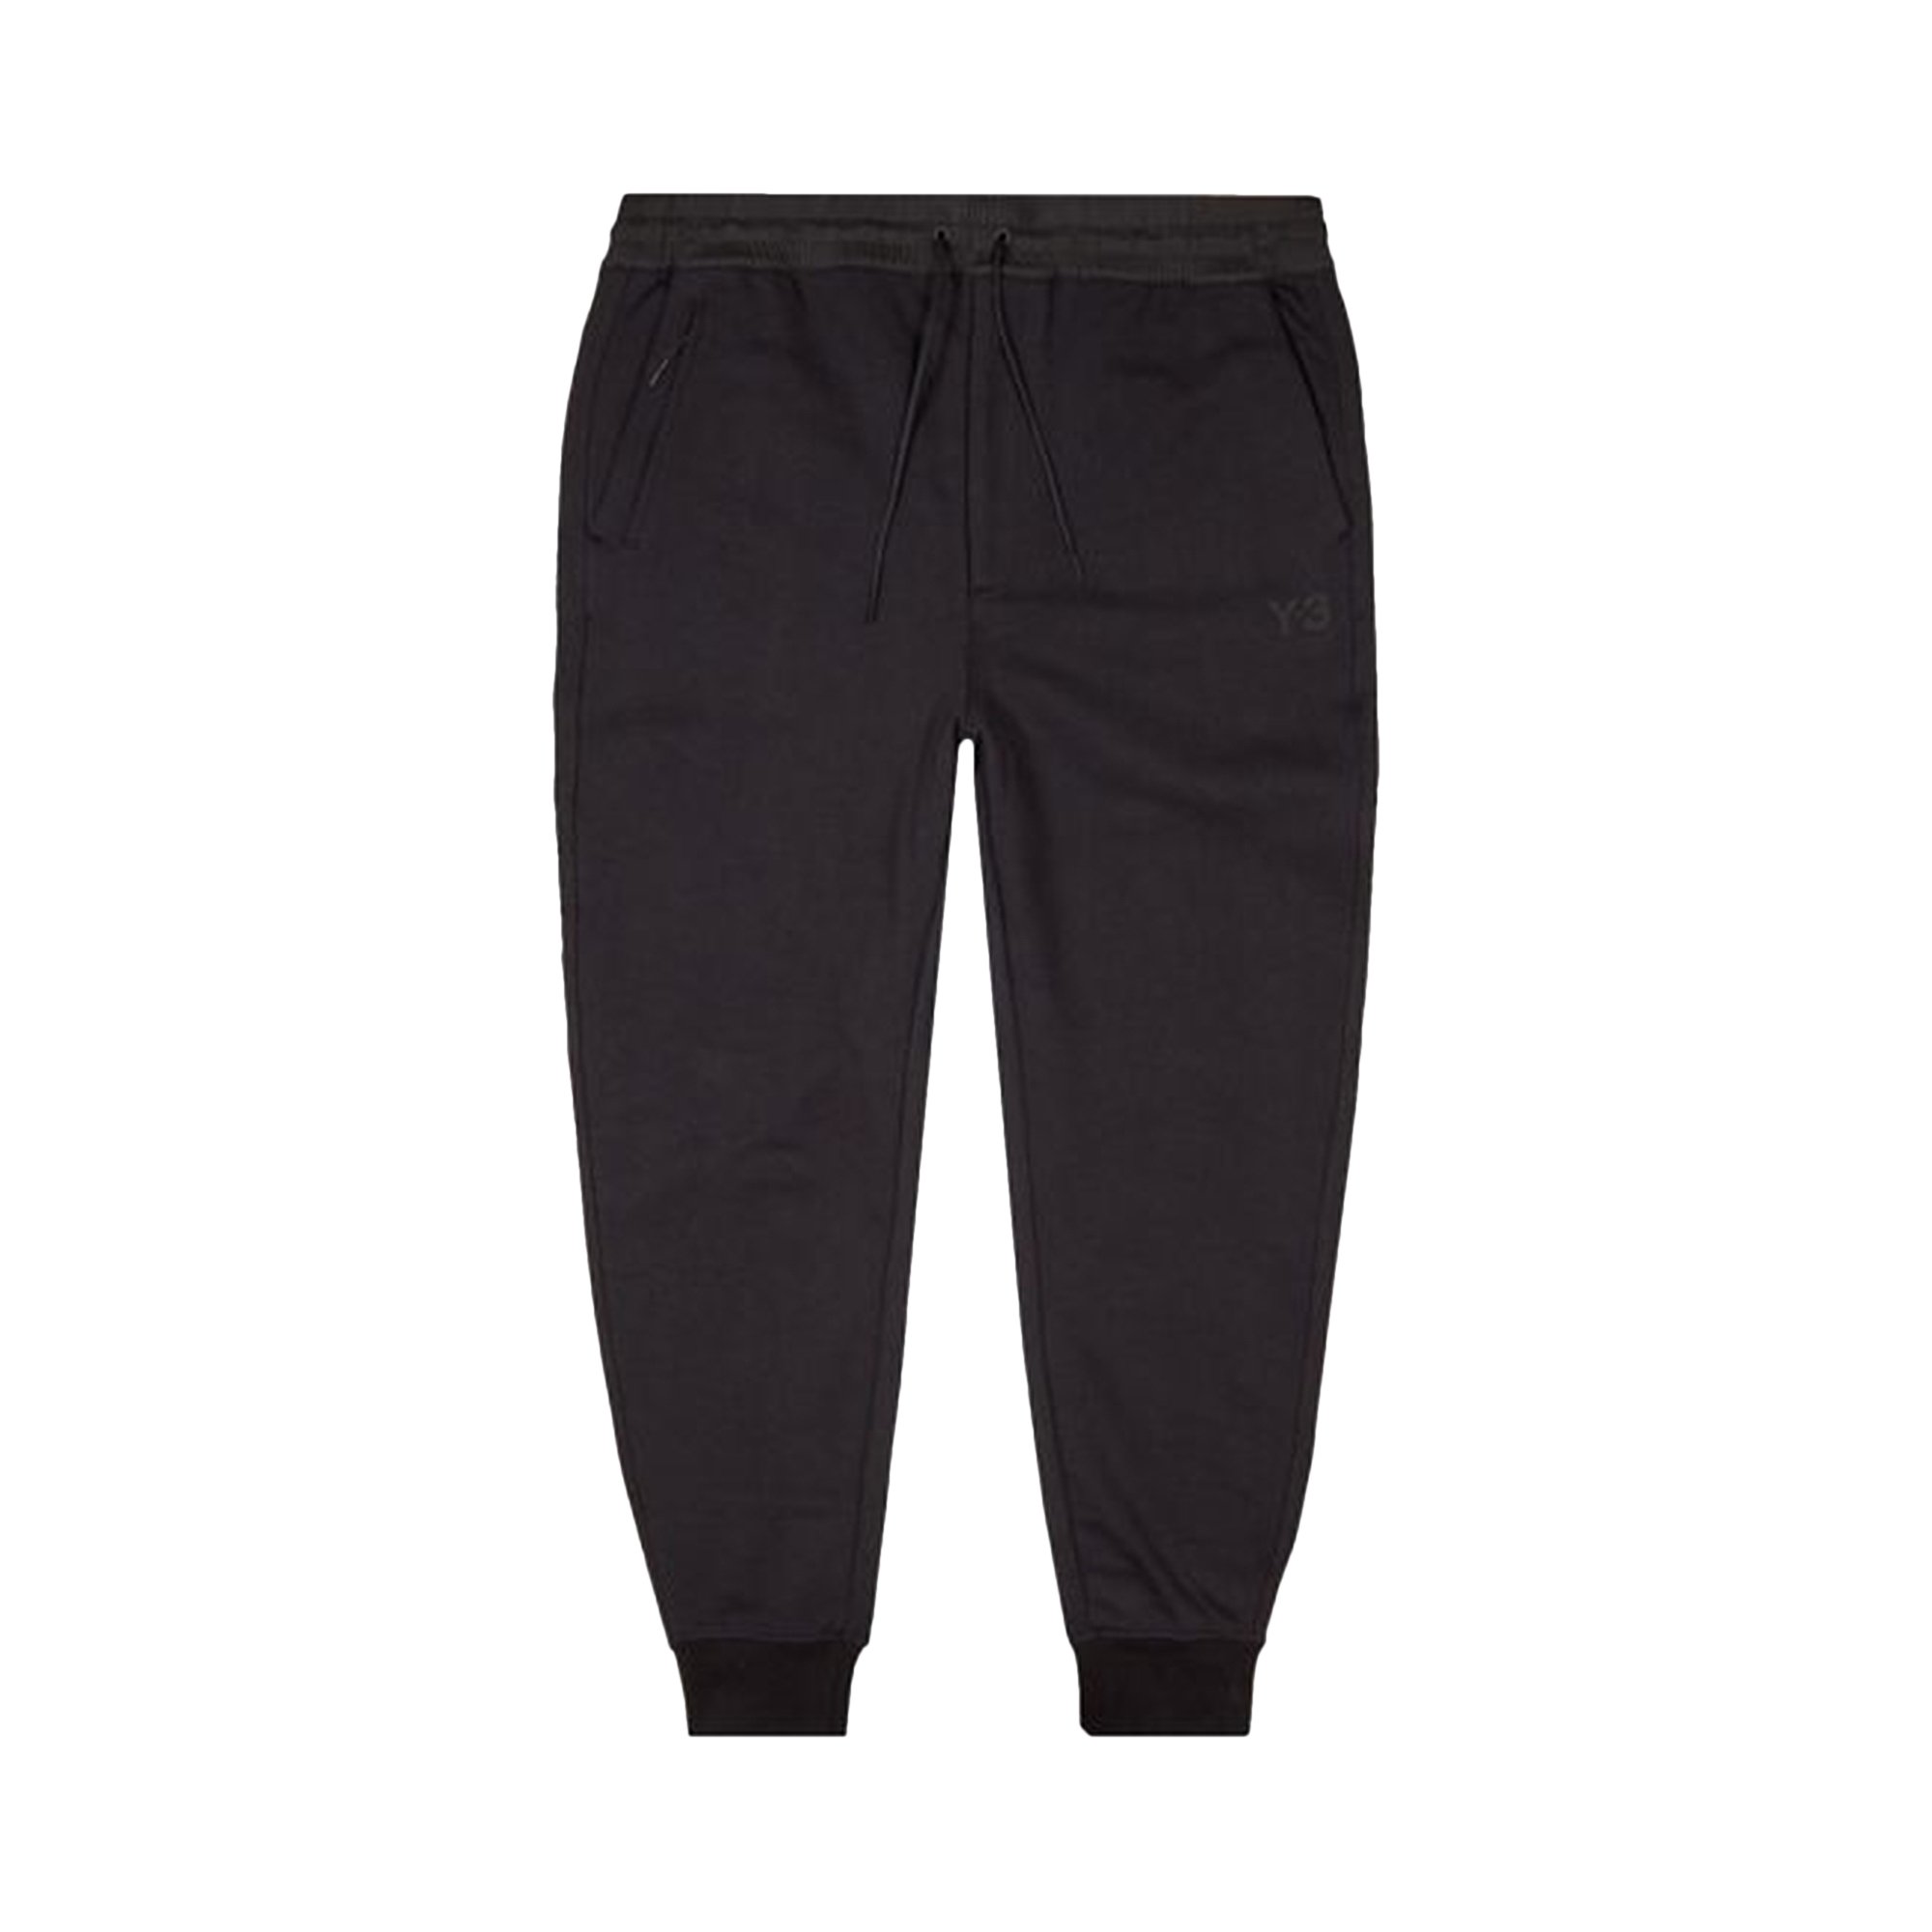 Y-3 Classic Terry Cuffed Pants 'Black'